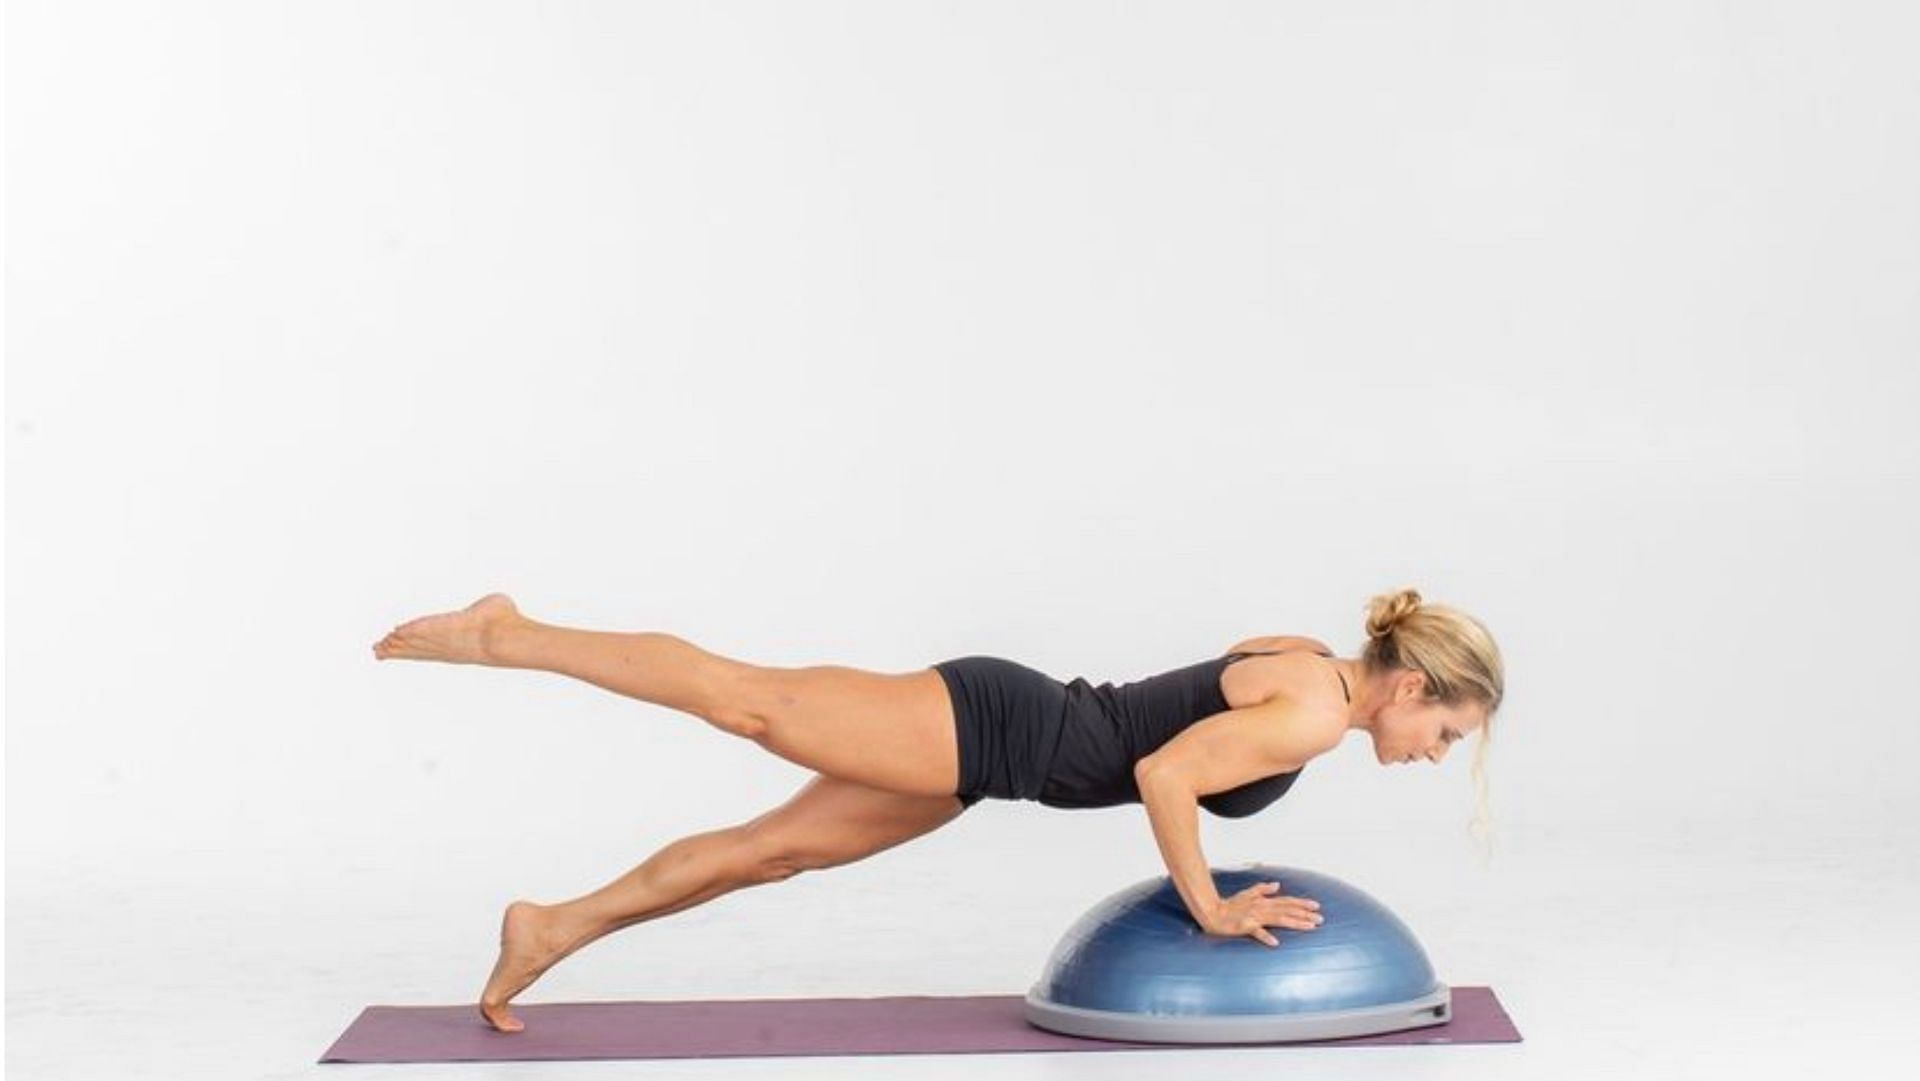 5 Bosu ball exercises for a full body workout